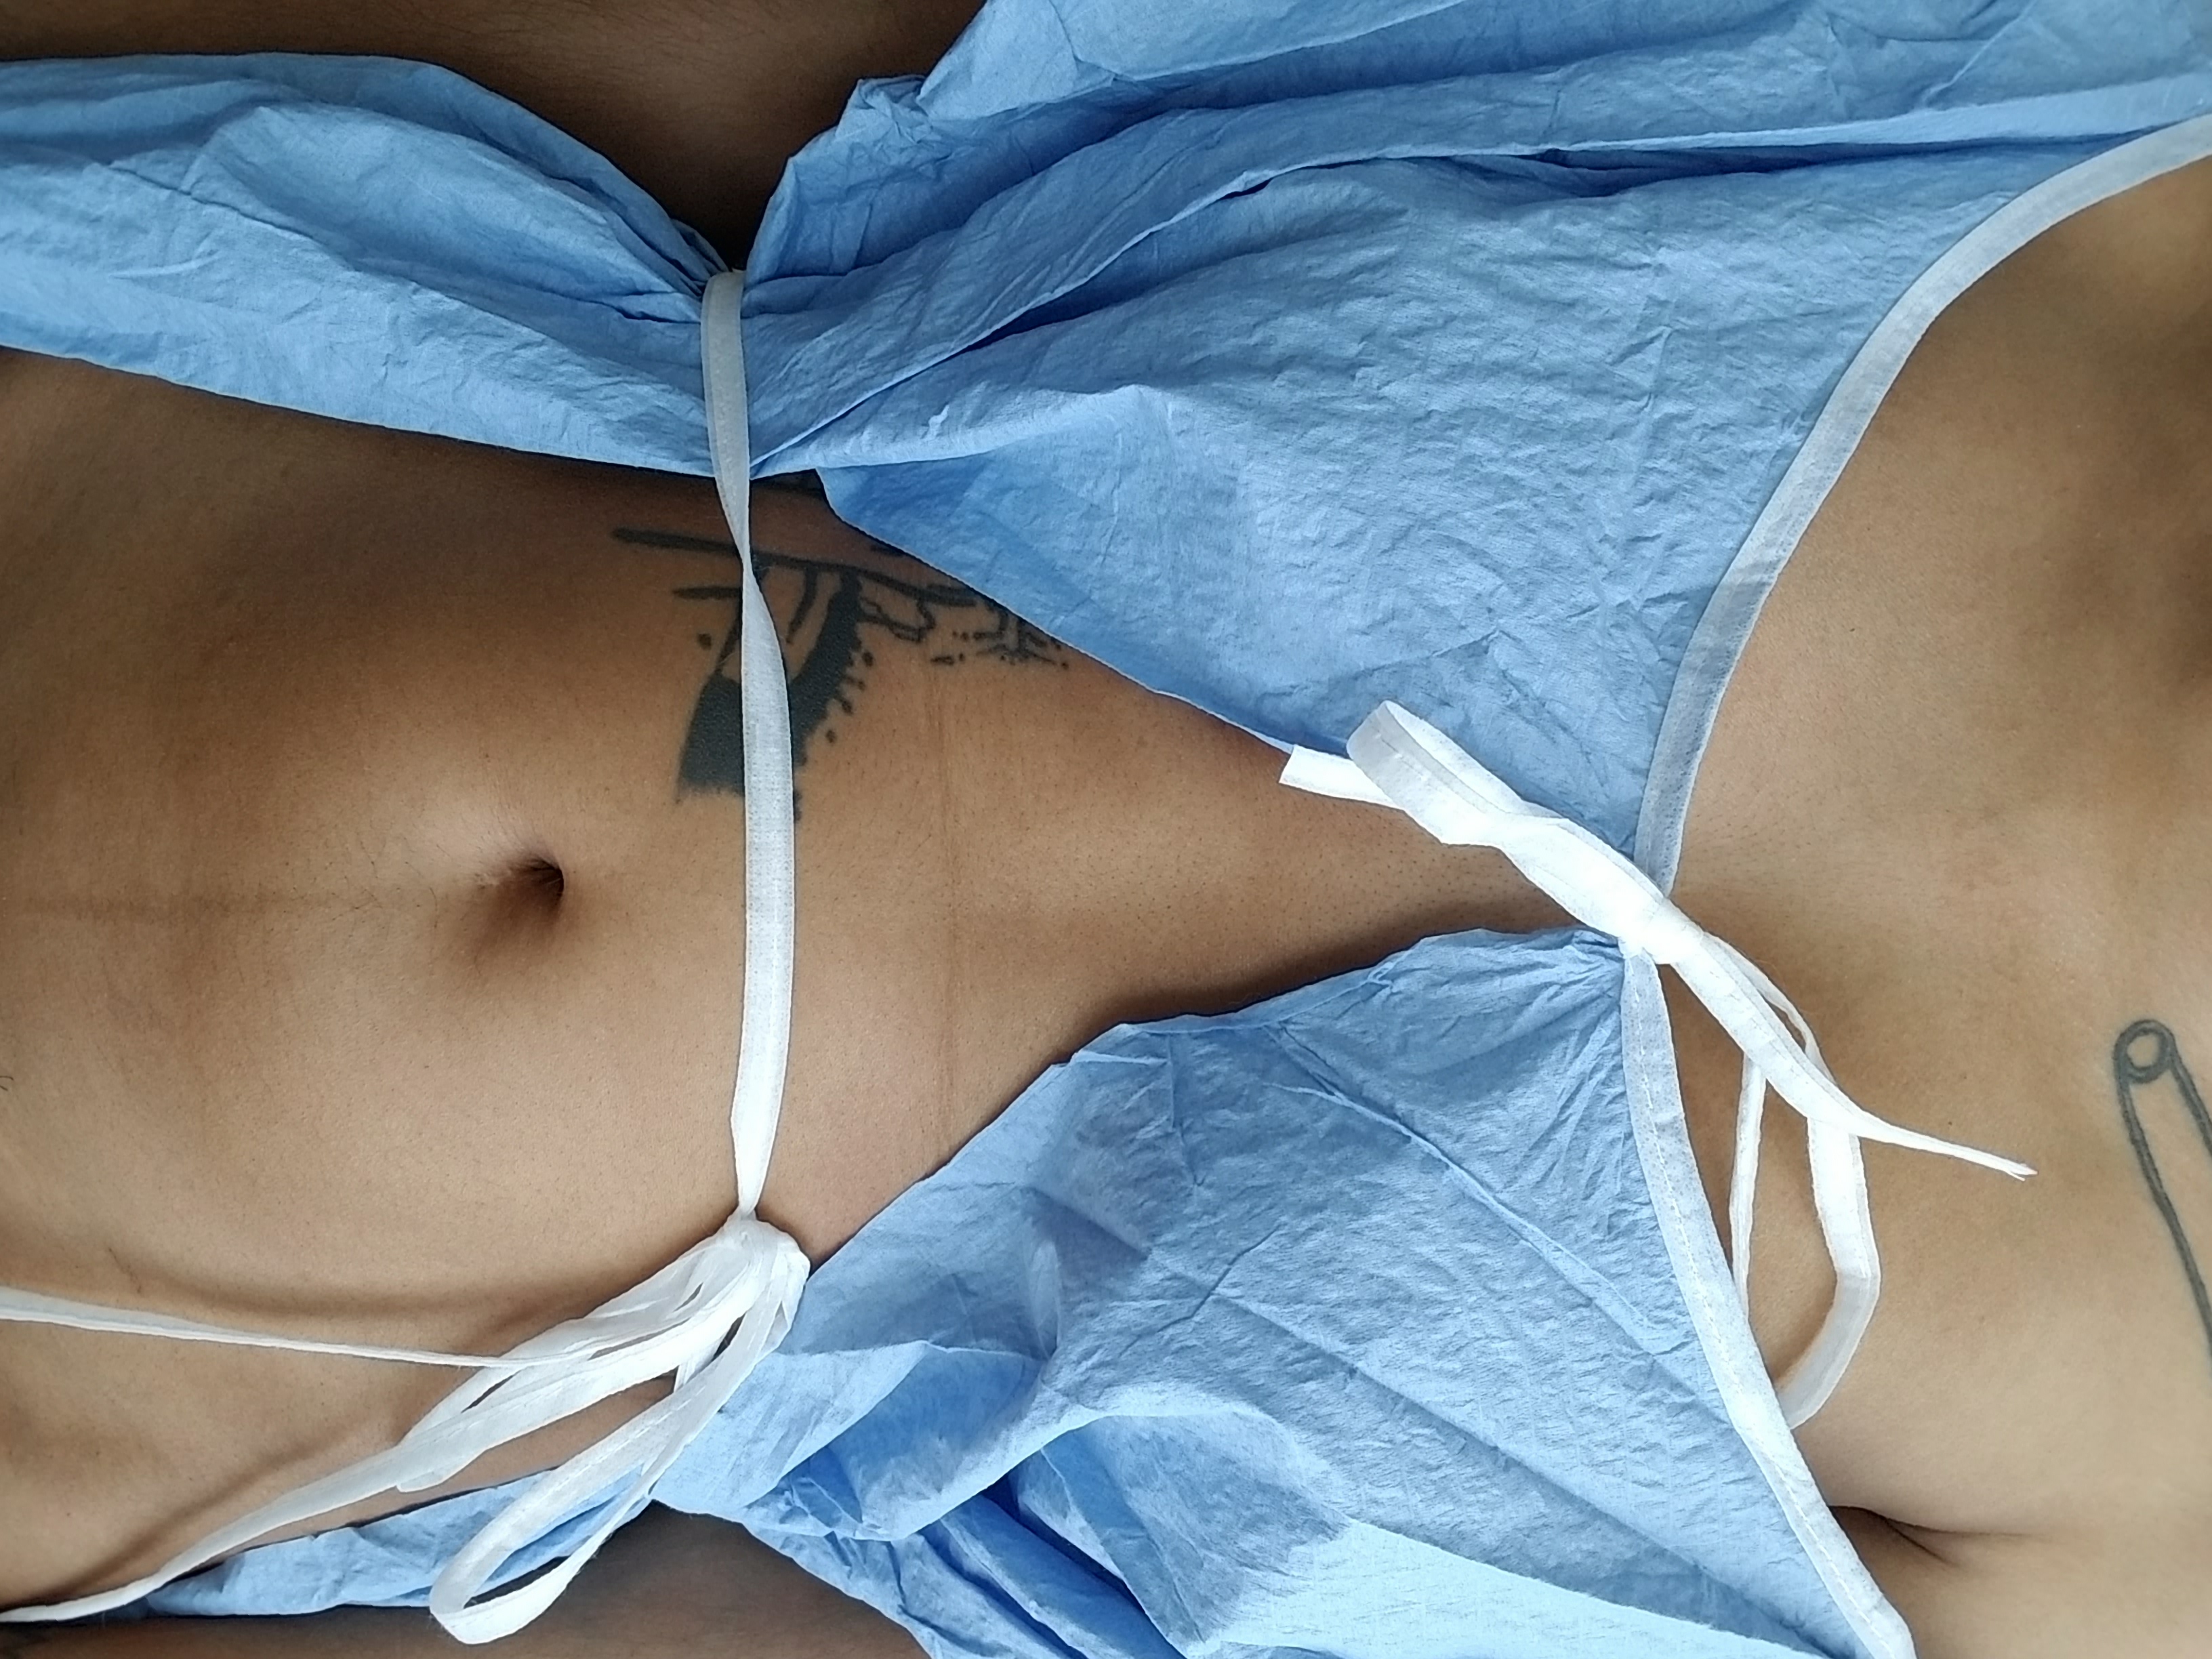 I pose in a blue paper hospital gown, open to the front, displaying scars at my hip and navel.